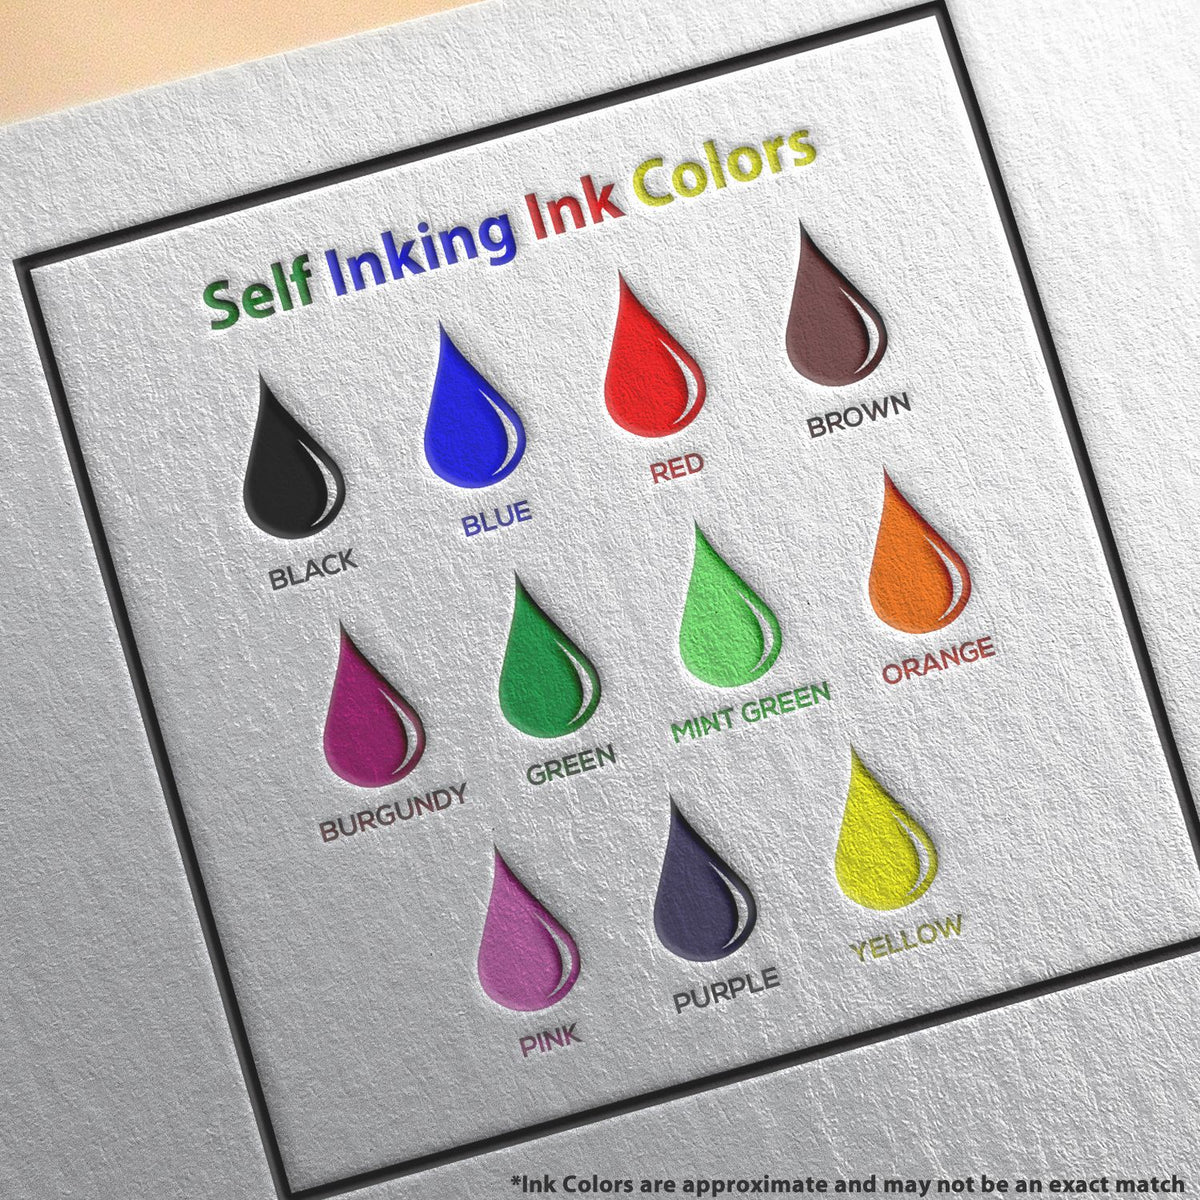 A picture showing the different ink colors or hues available for the Self-Inking Rectangular Arkansas Notary Stamp product.